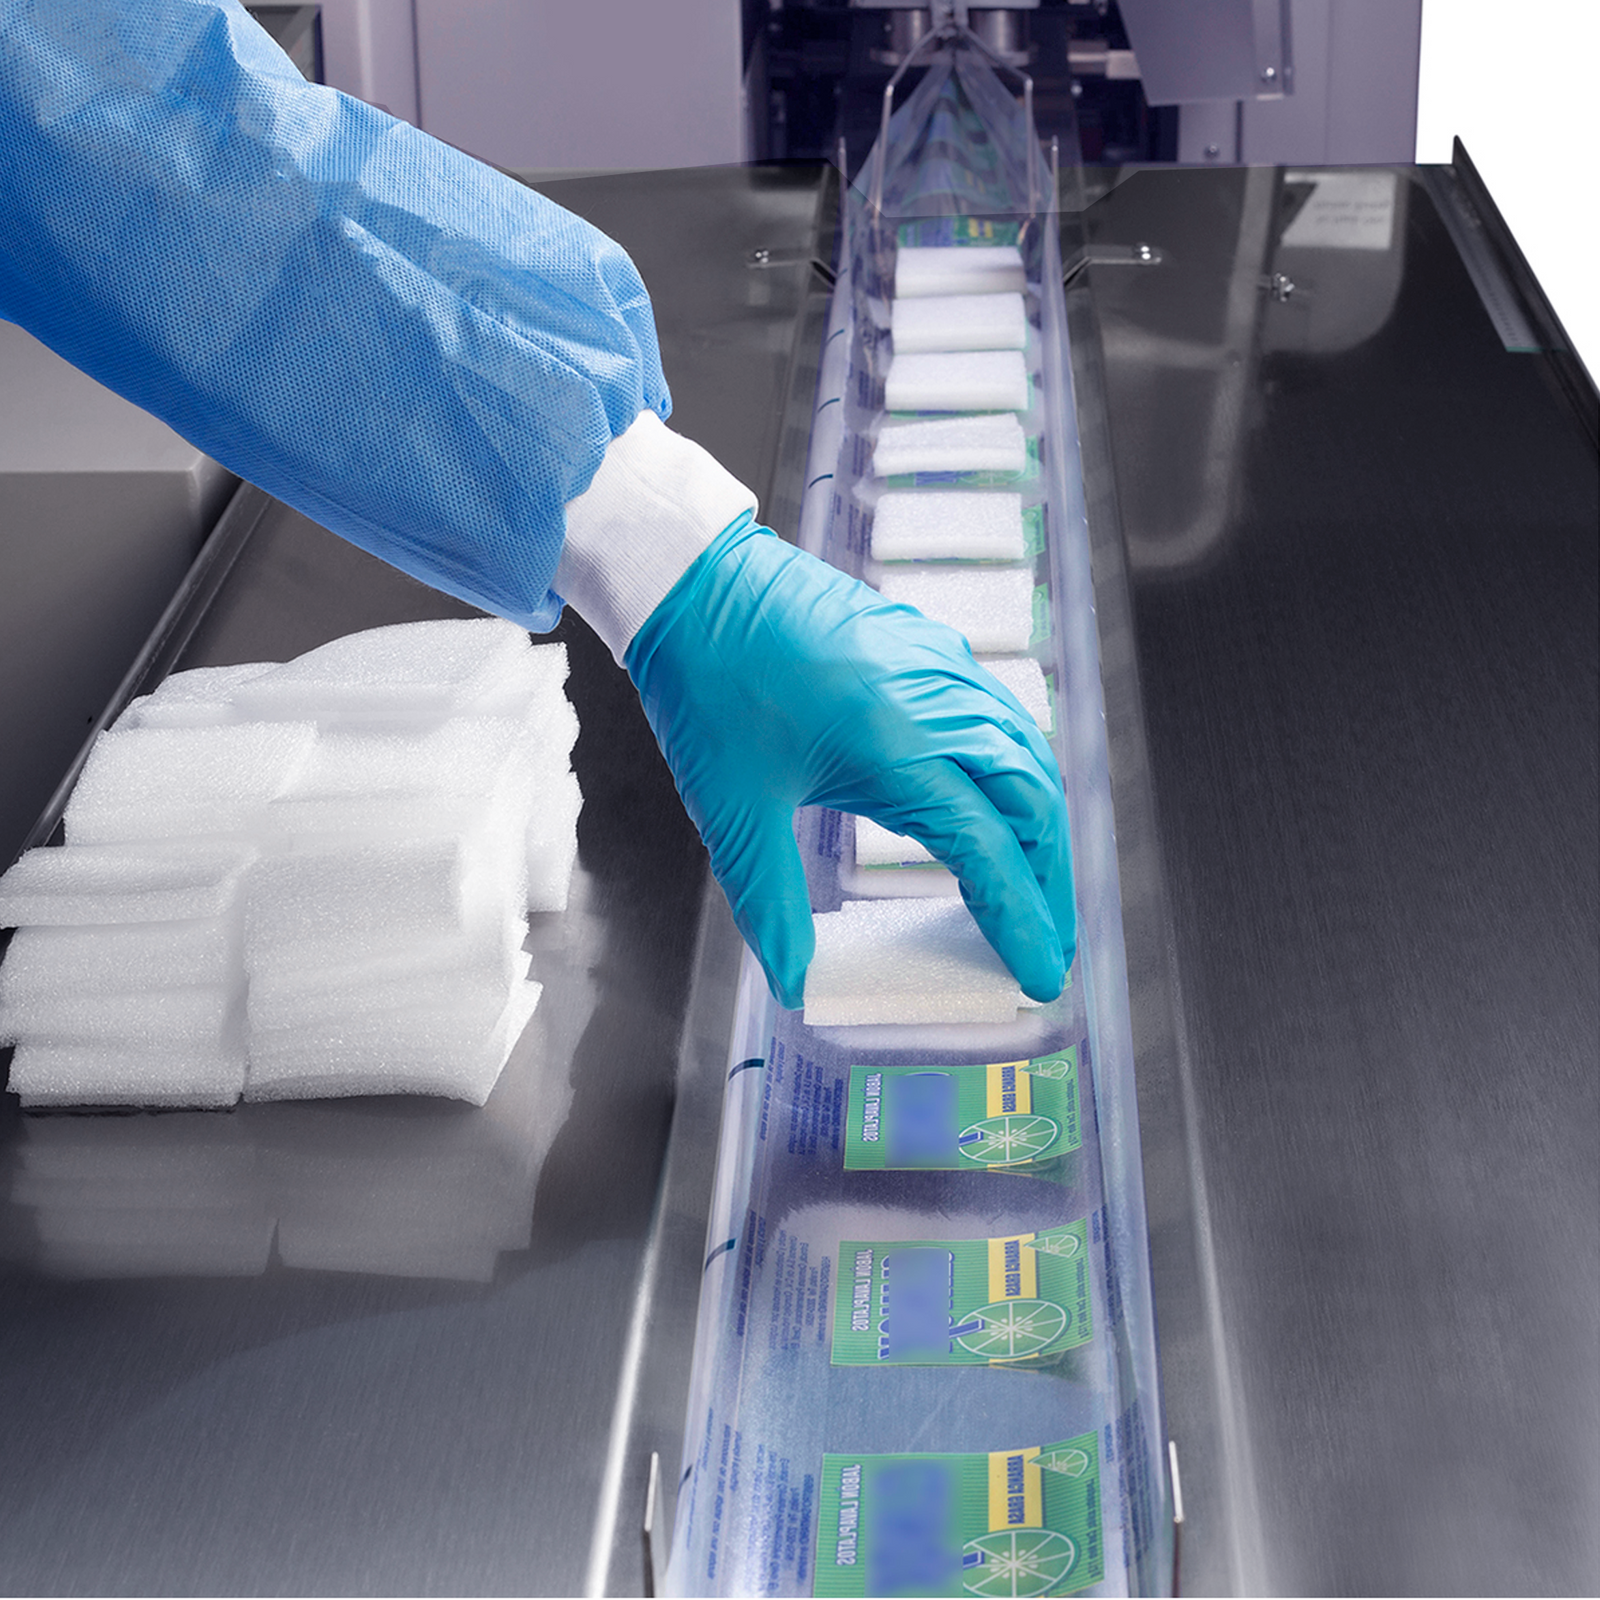 Worker operating an inverted flow pack system wearing a blue disposable glove and a blue gown. He is seen placing a white sponge-like product on top of the package film track for packaging and sealing